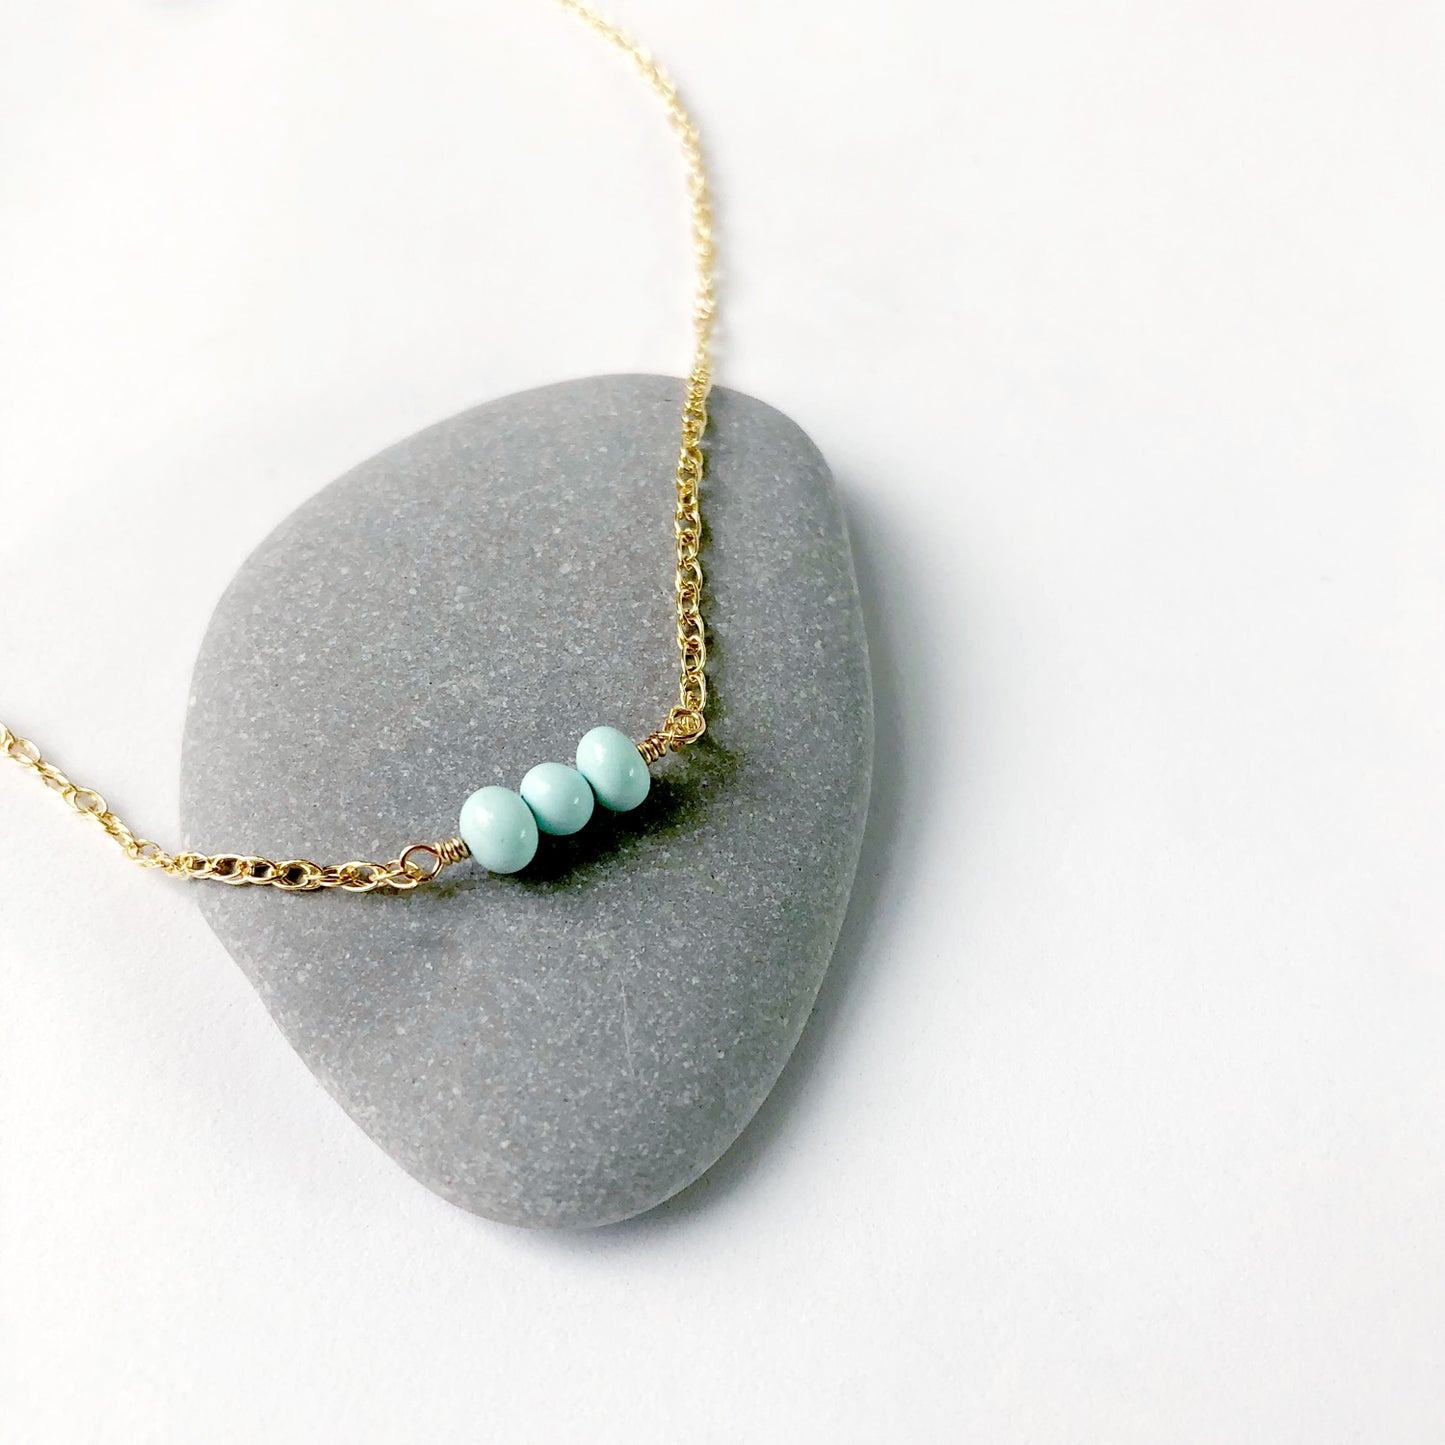 Turquoise Three Necklace